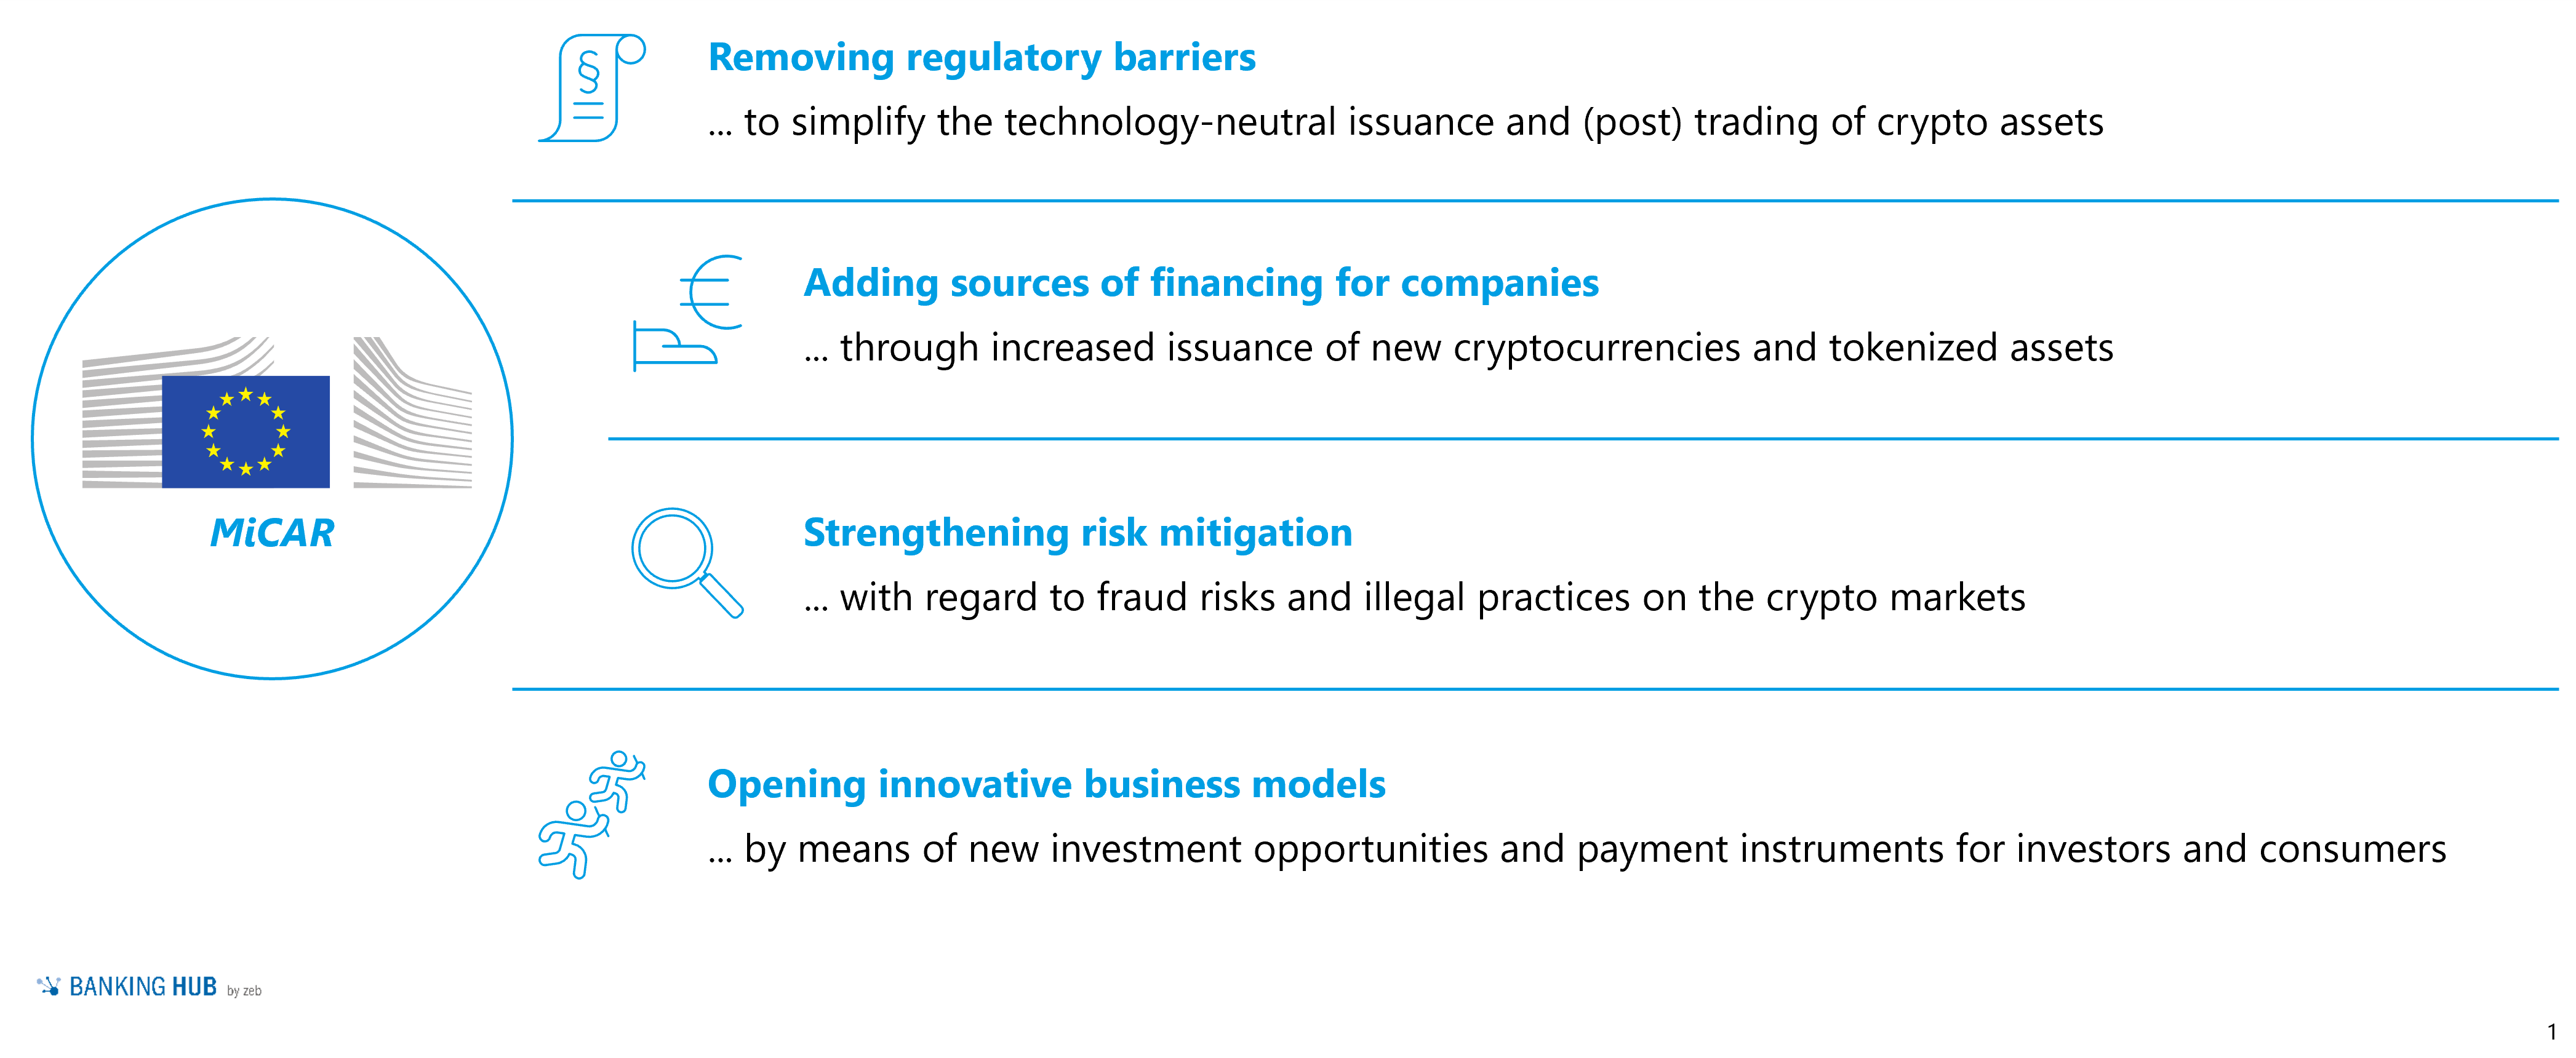 MiCAR the regulatory framework for crypto assets has been fleshed out